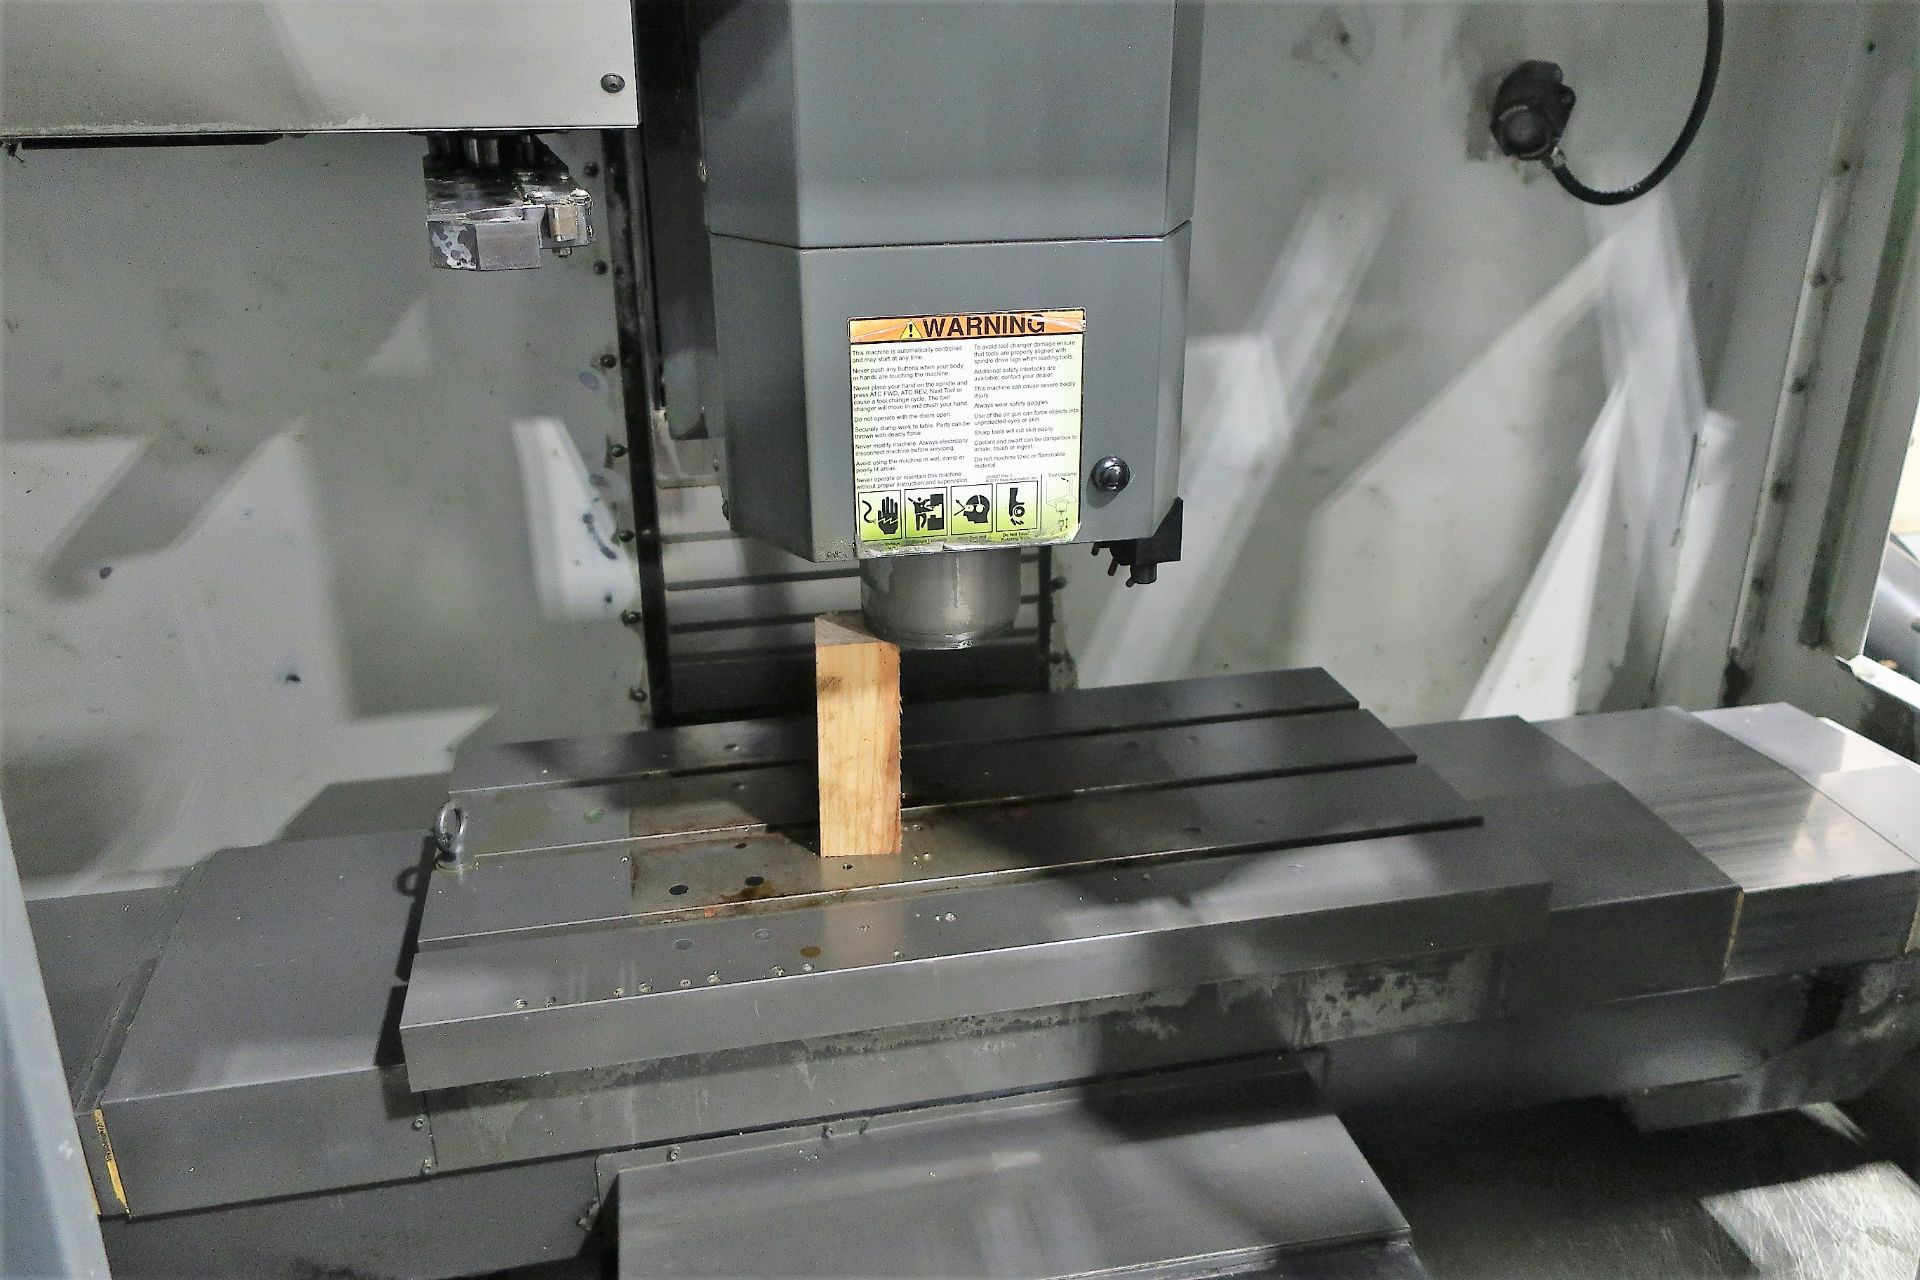 HAAS VF2-YT CNC 3-AXIS VERTICAL MACHINING CENTER, 15K RPM SPINDLE, S/N 1082158, NEW 2010 - Image 3 of 9